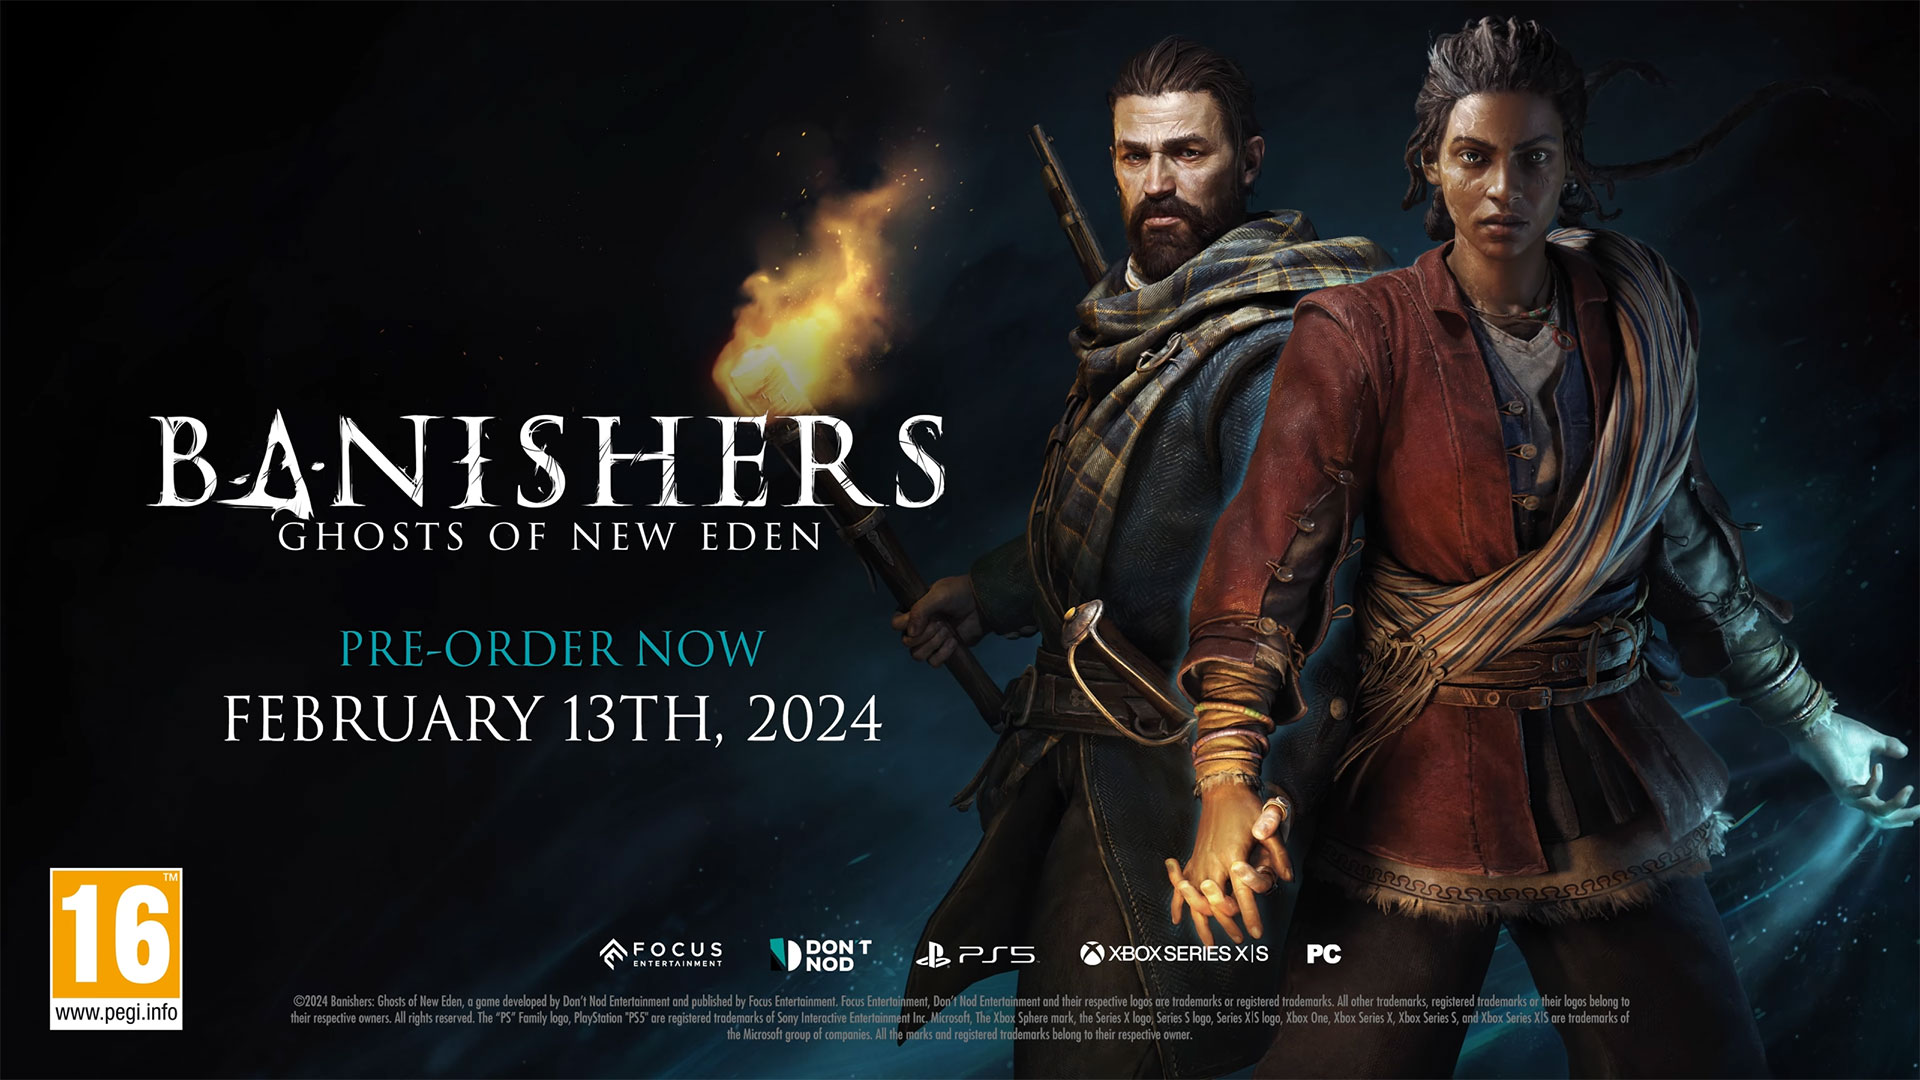 Banishers: Ghosts of New Eden launches on February 13